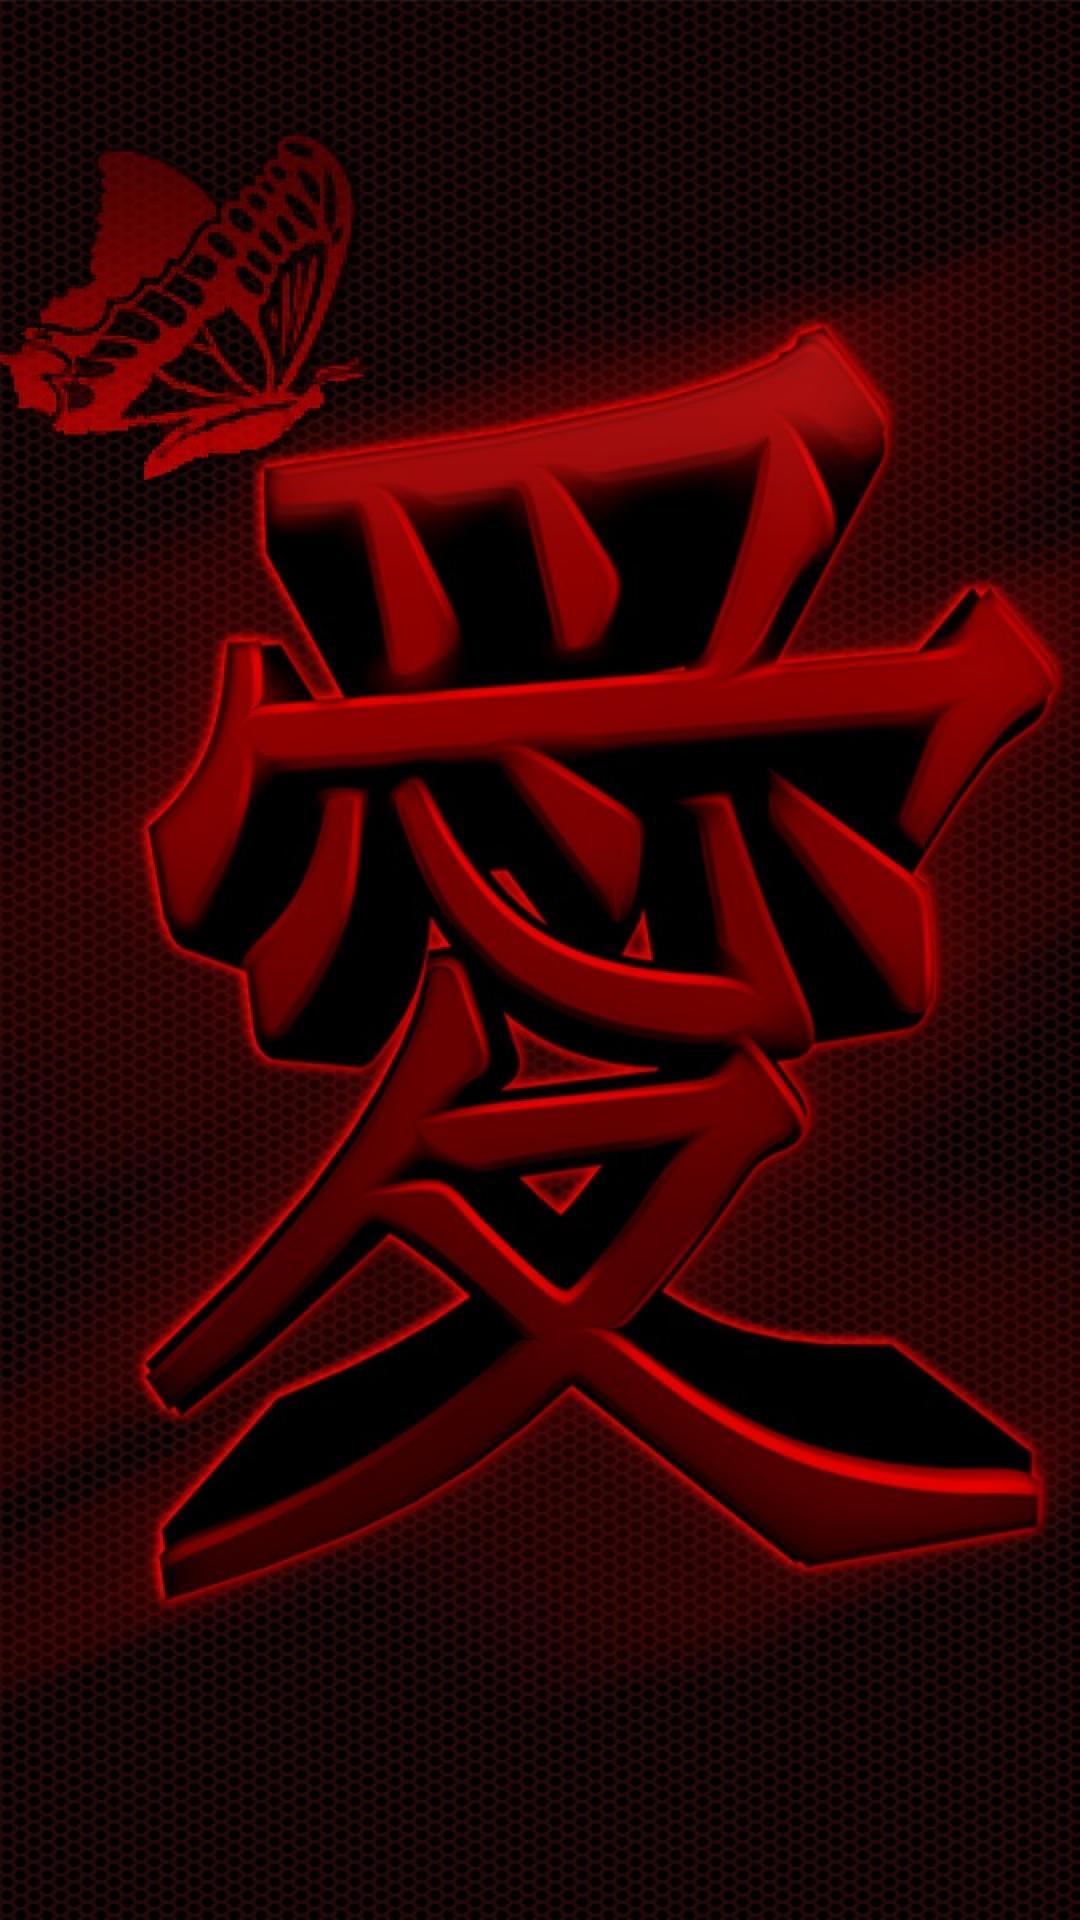 Chinese Character iPhone Wallpaper Free Chinese Character iPhone Background